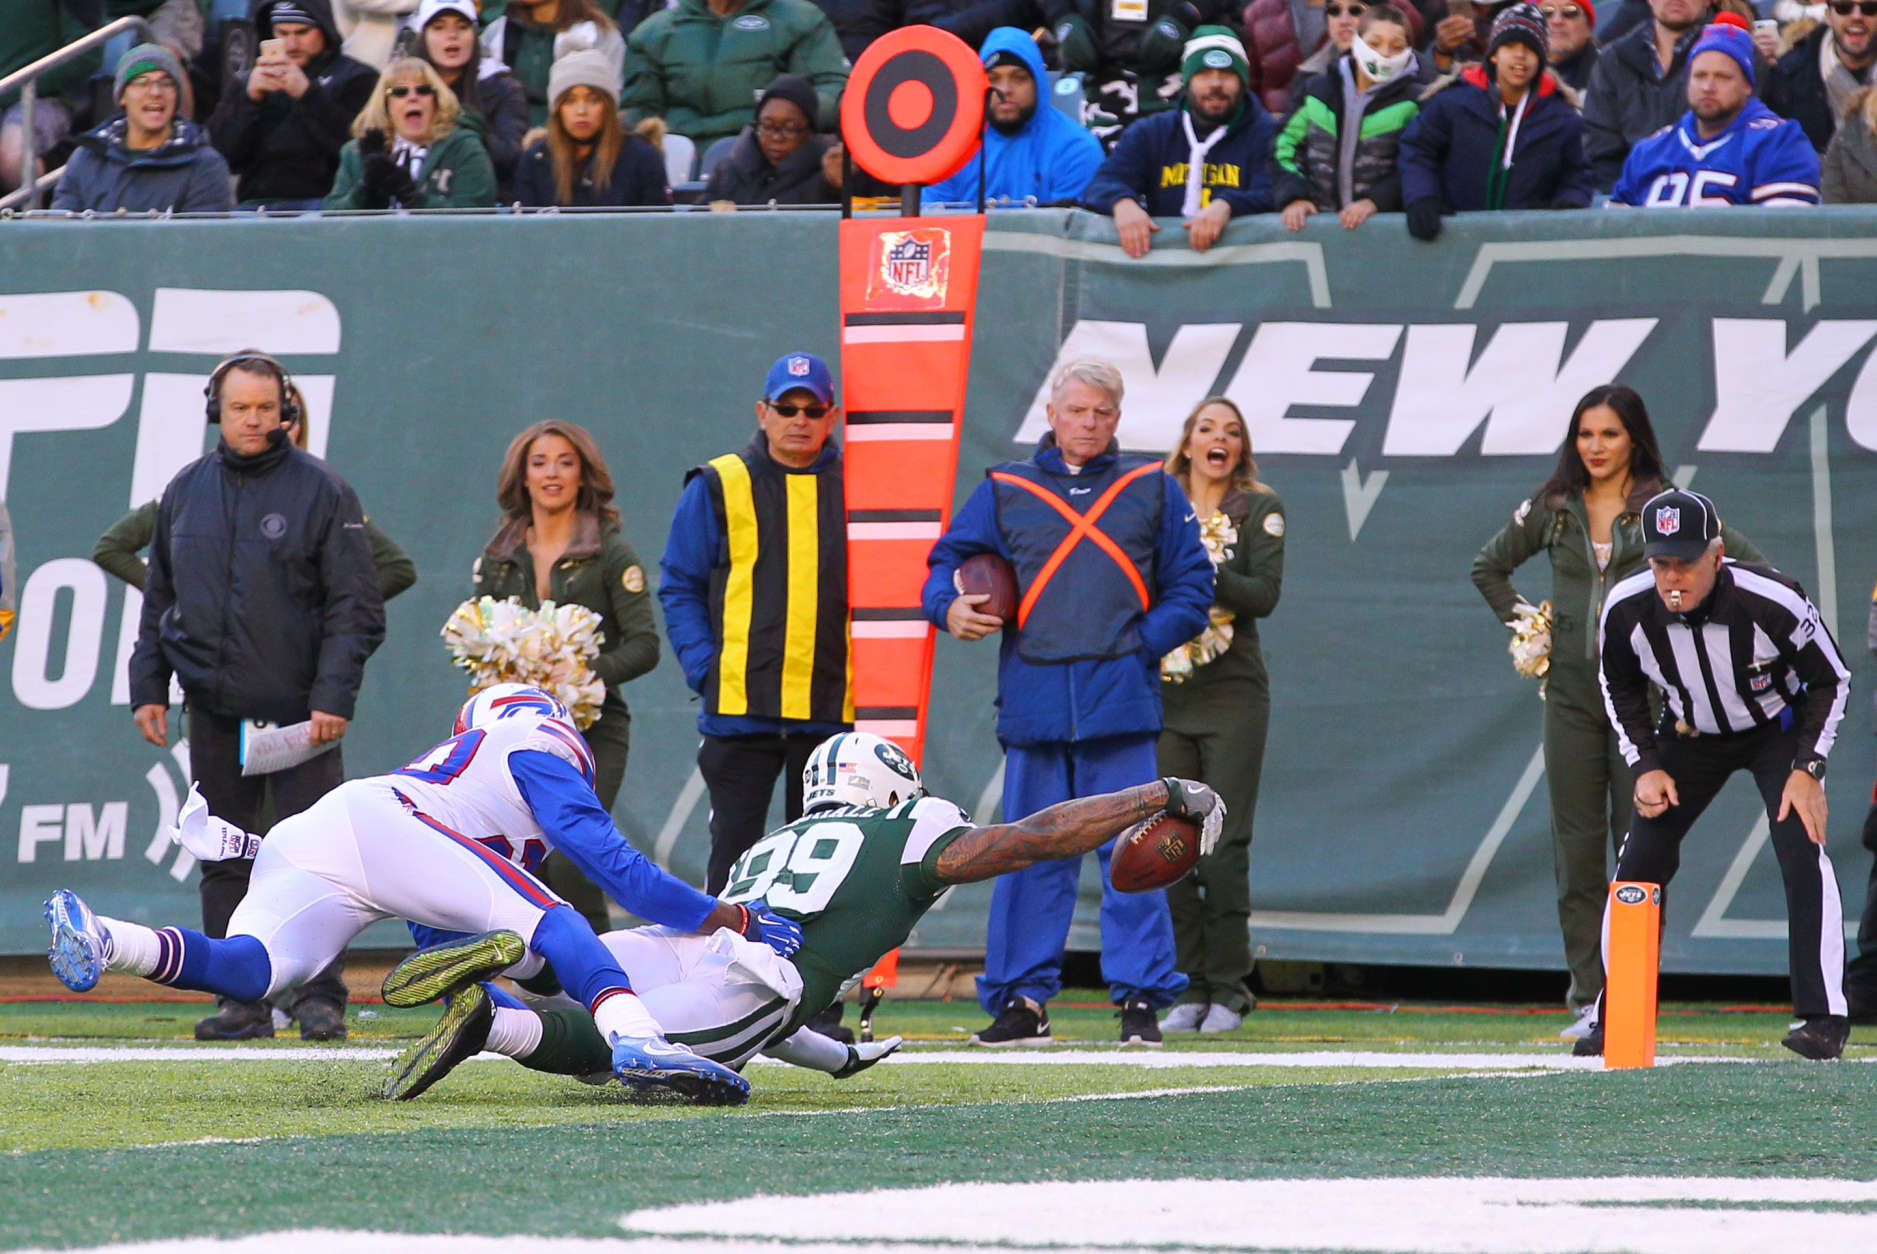 EAST RUTHERFORD, NJ - JANUARY 01:  Jalin Marshall #89 of the New York Jets dives for a touchdown during the second half of their game against the Buffalo Bills at MetLife Stadium on January 1, 2017 in East Rutherford, New Jersey. (Photo by Ed Mulholland/Getty Images)